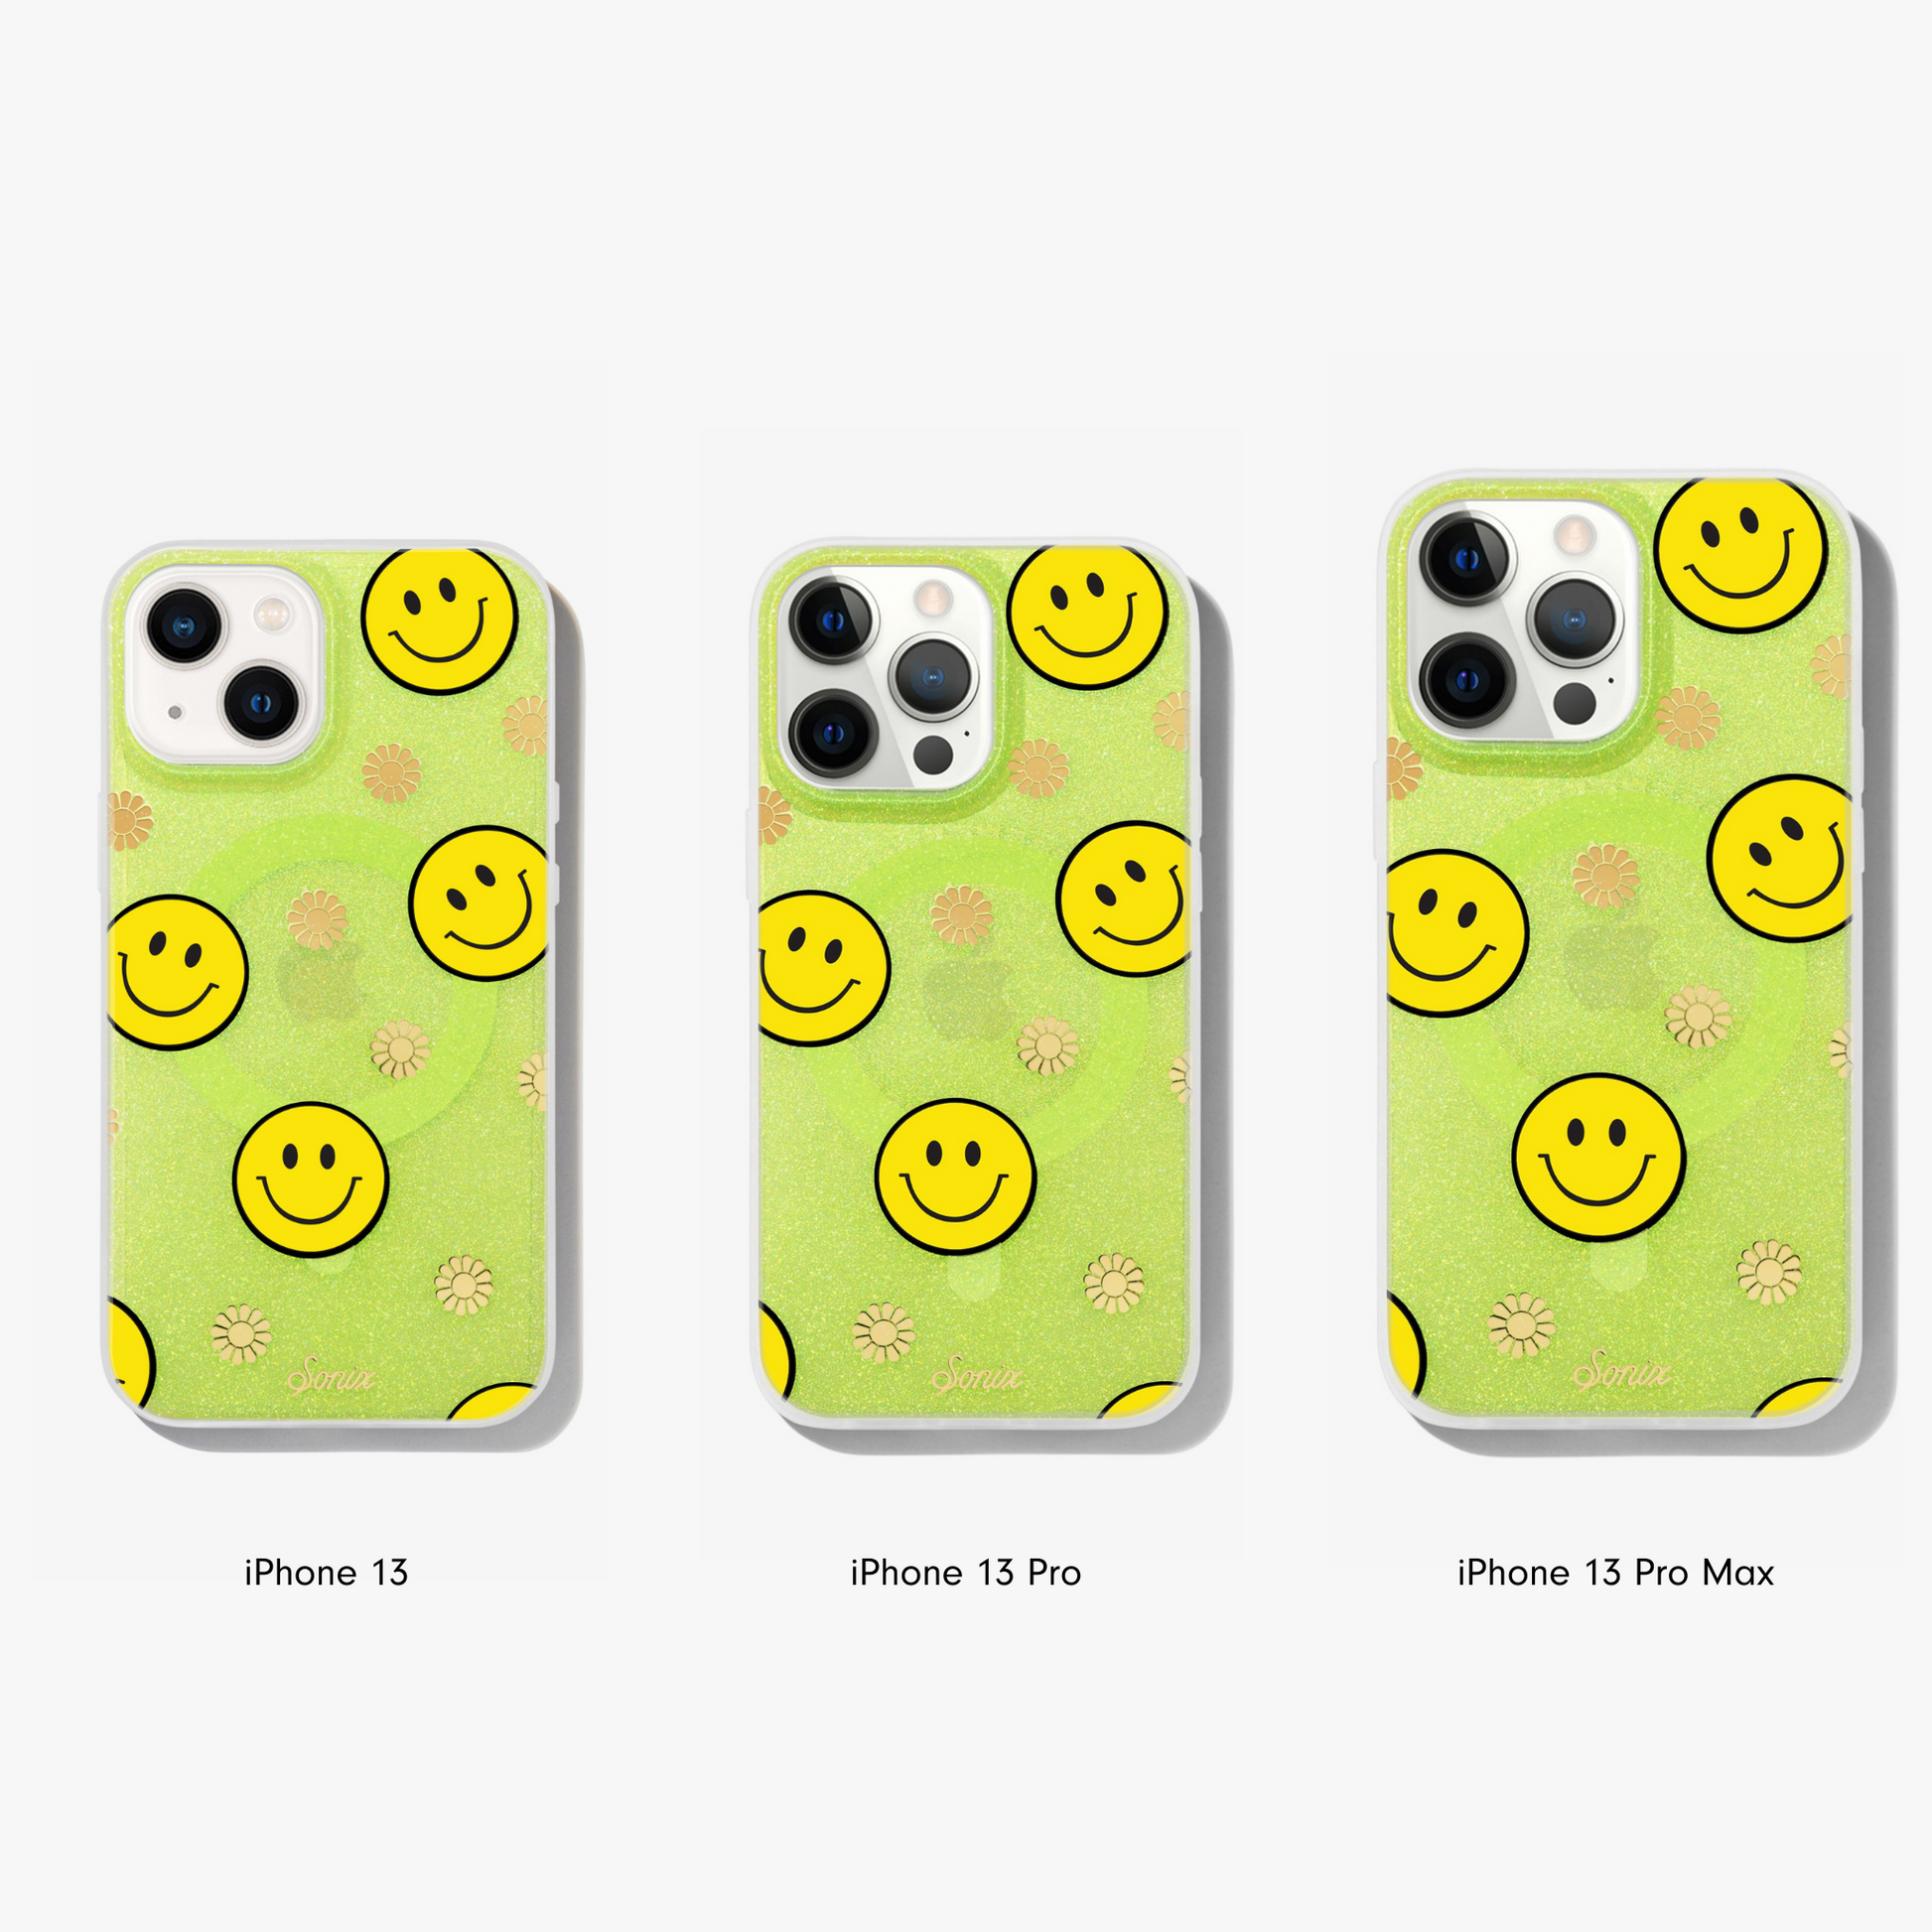 The clear yellow case infused with iridescent glitter features happy faces and signature gold foil flowers shown on an iphone 13, iphone 13 pro, and iphone 13 pro max